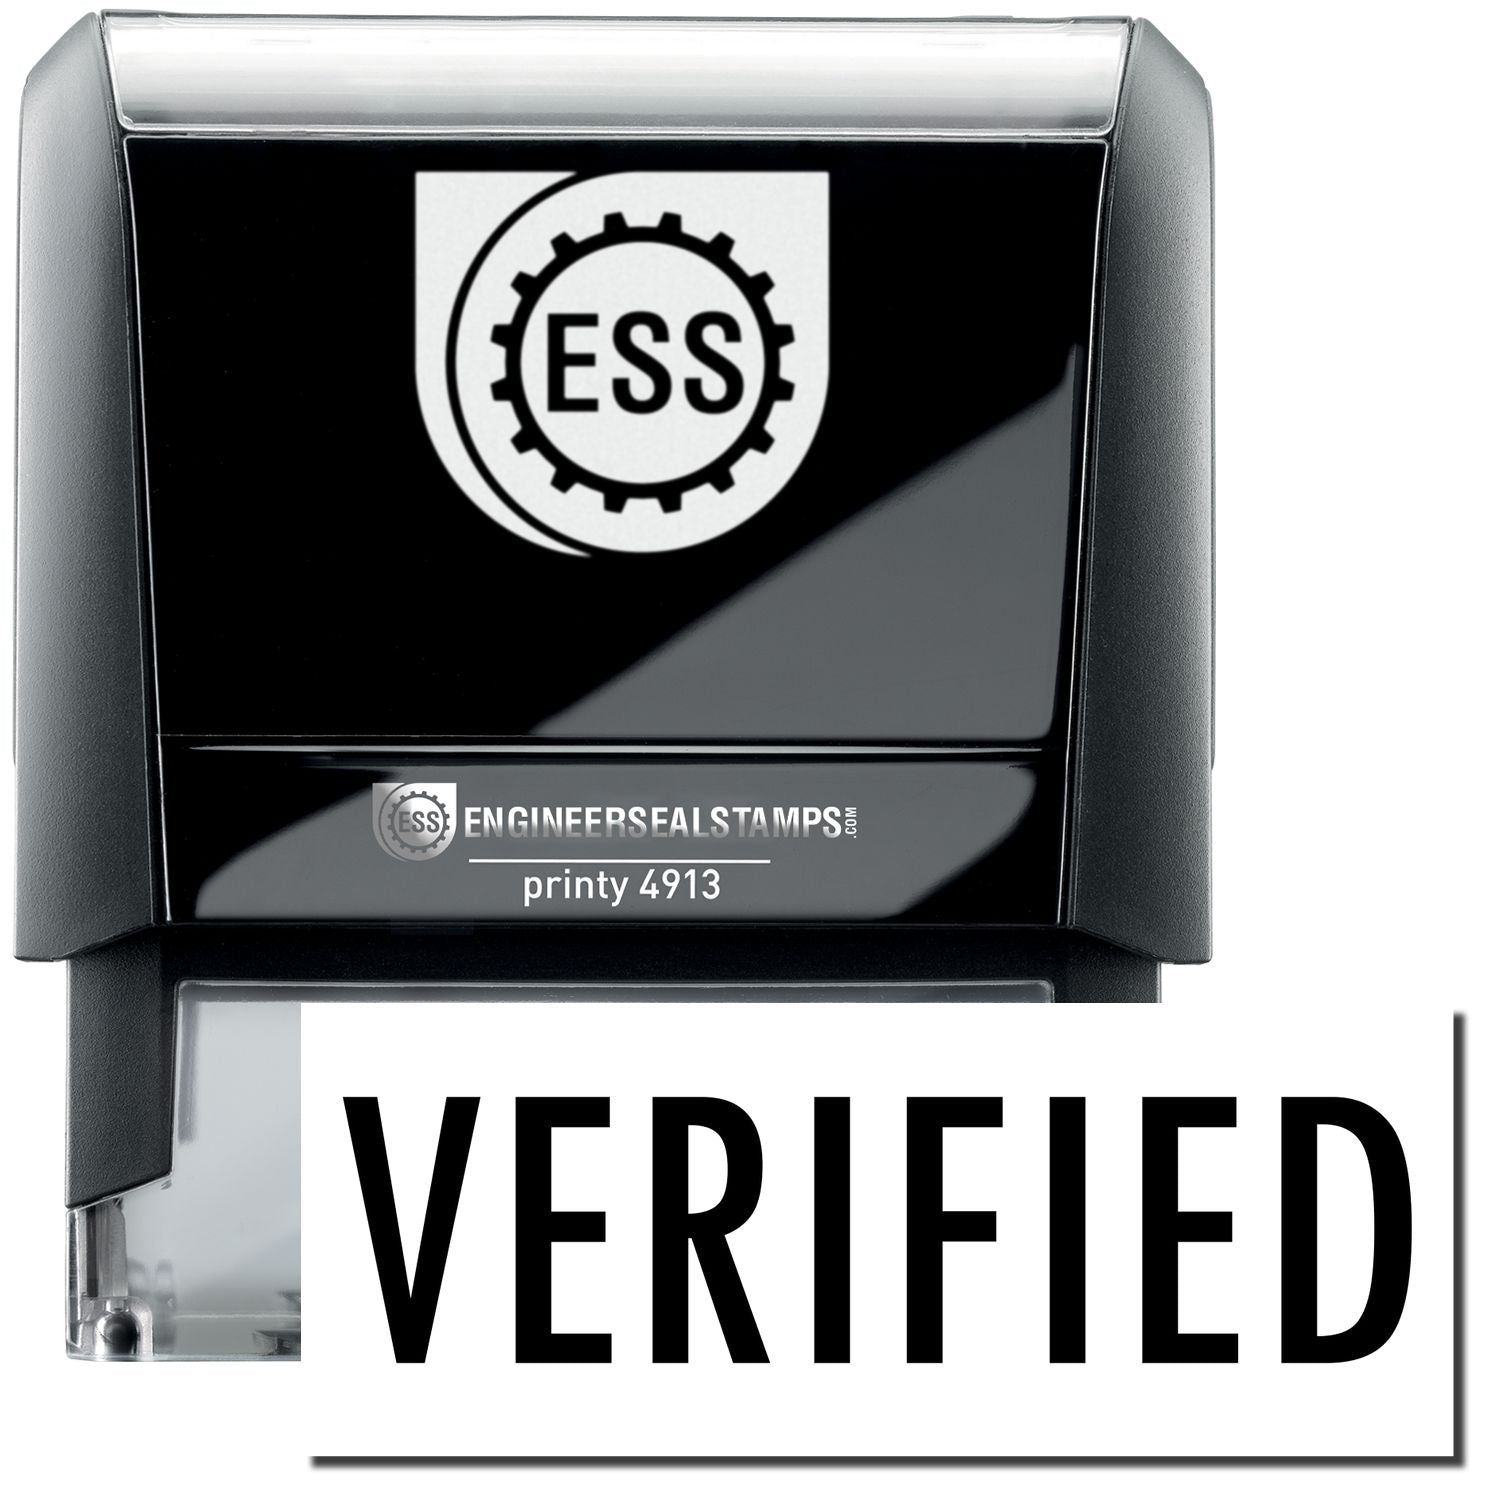 A self-inking stamp with a stamped image showing how the text "VERIFIED" in a large bold font is displayed by it.